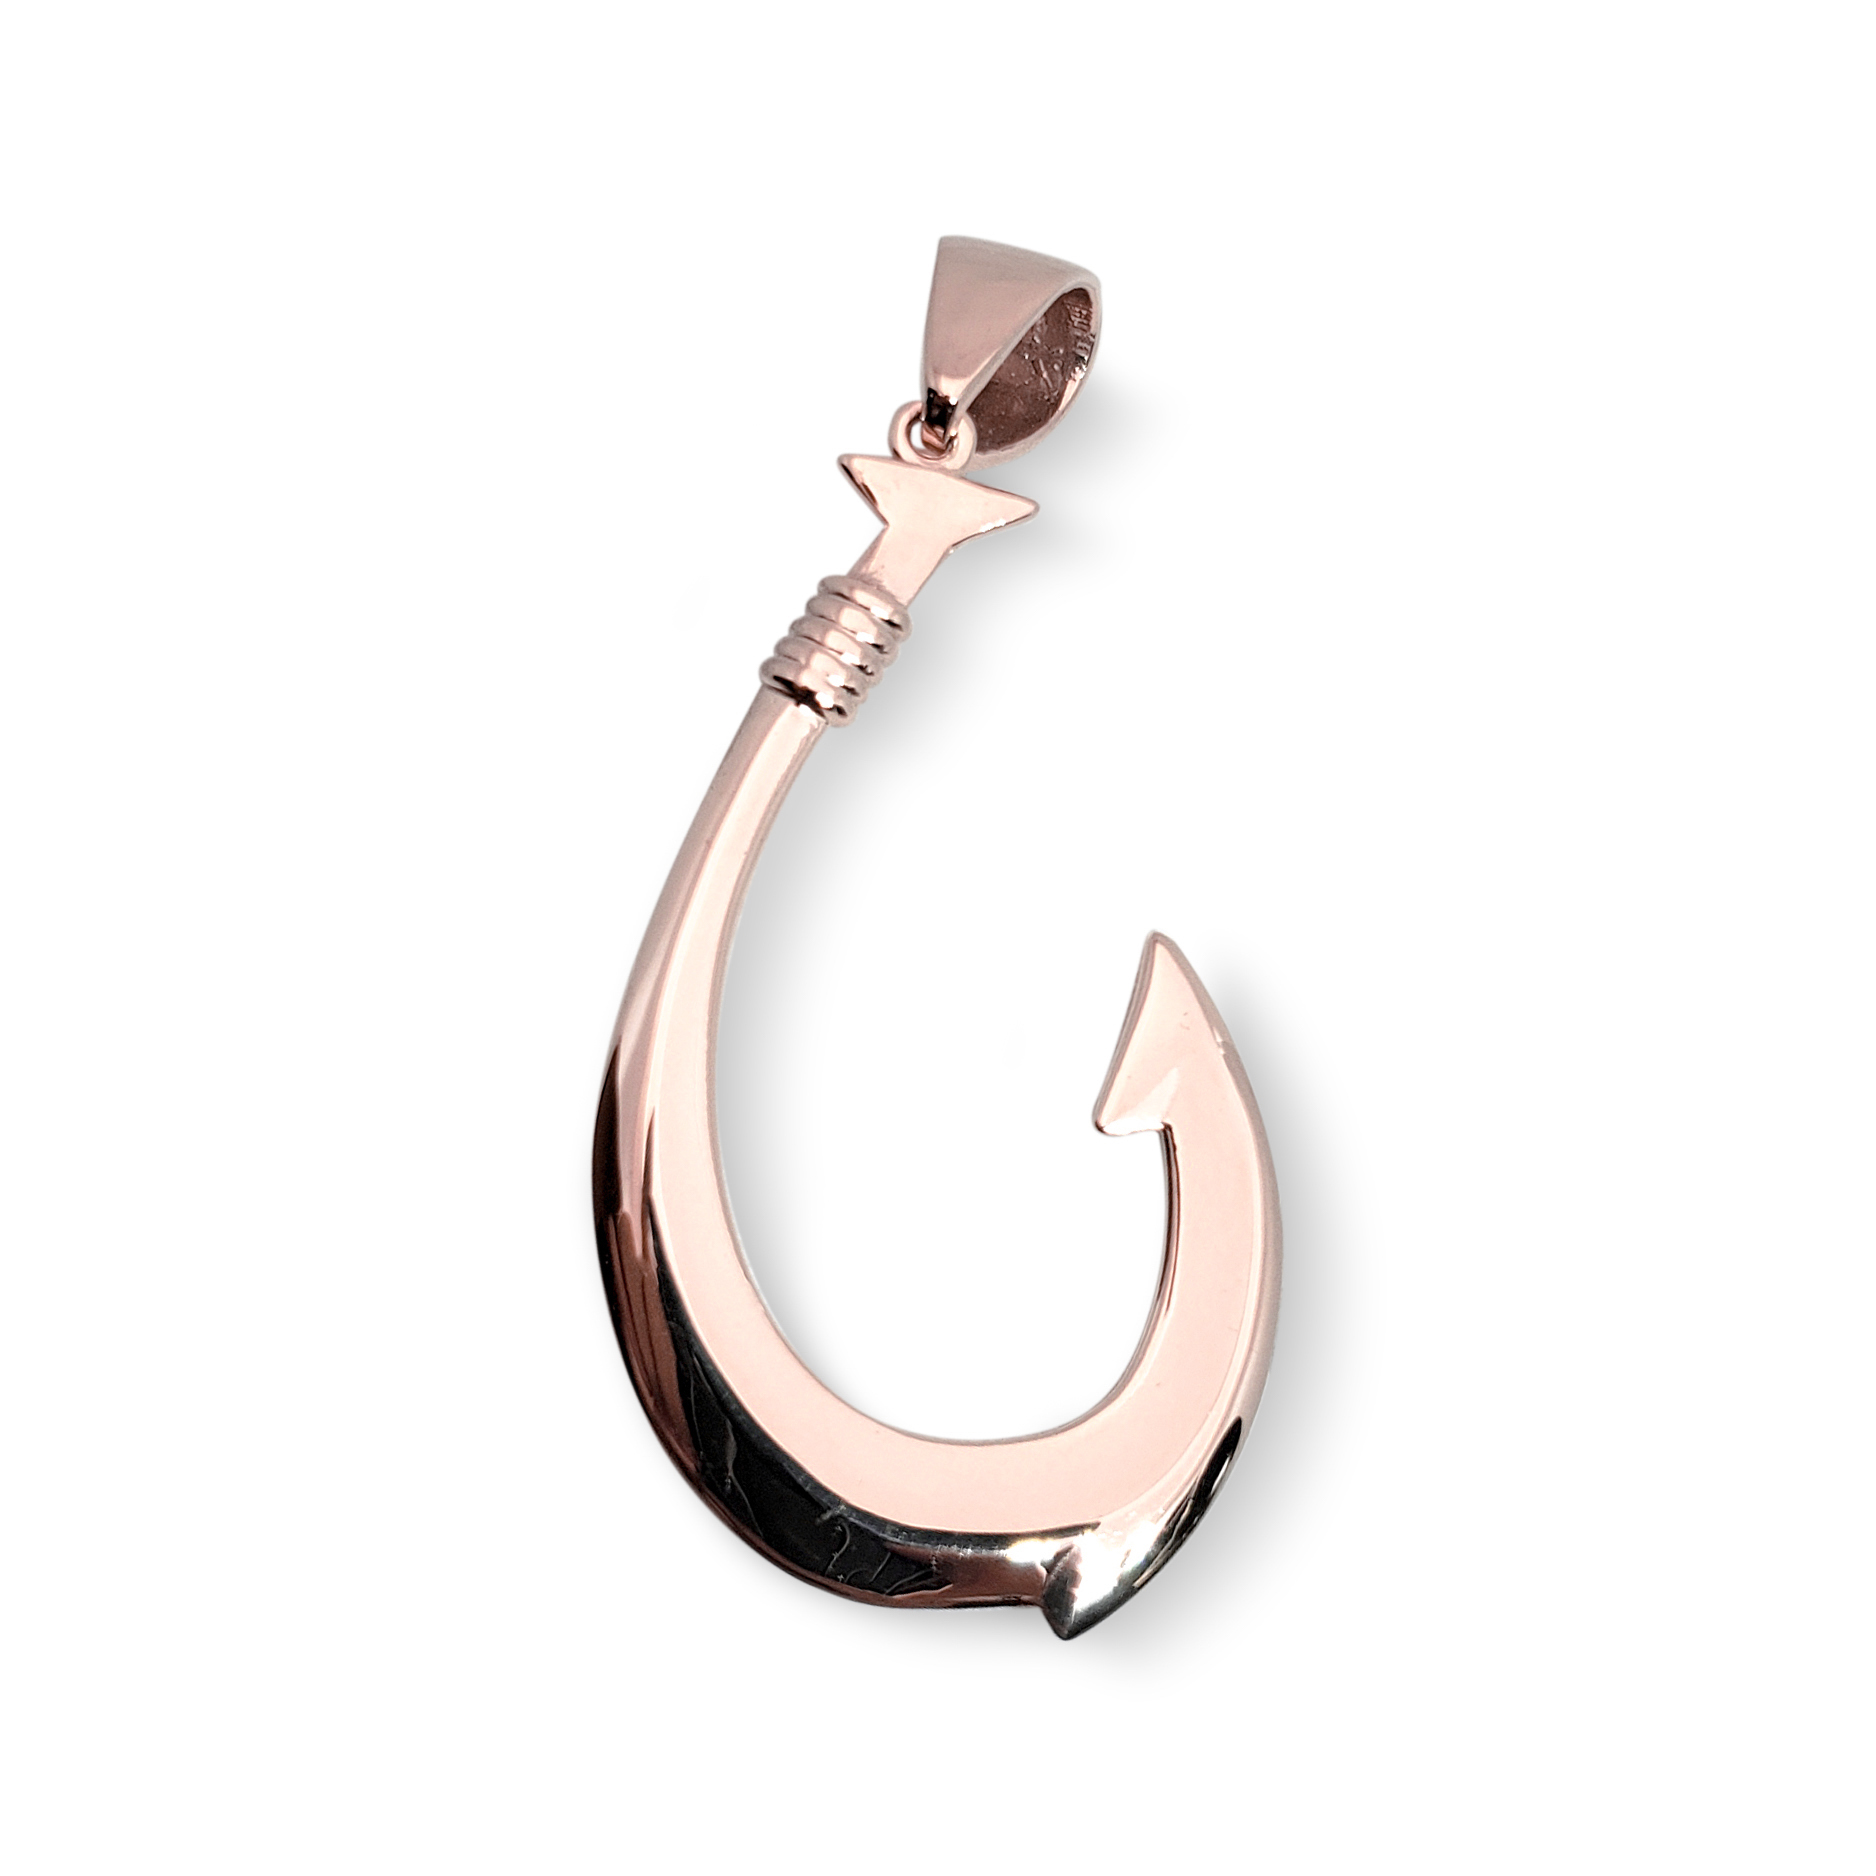 ROSE GOLD PLATED STERLING SILVER FISH HOOK PENDANT 10MM – The